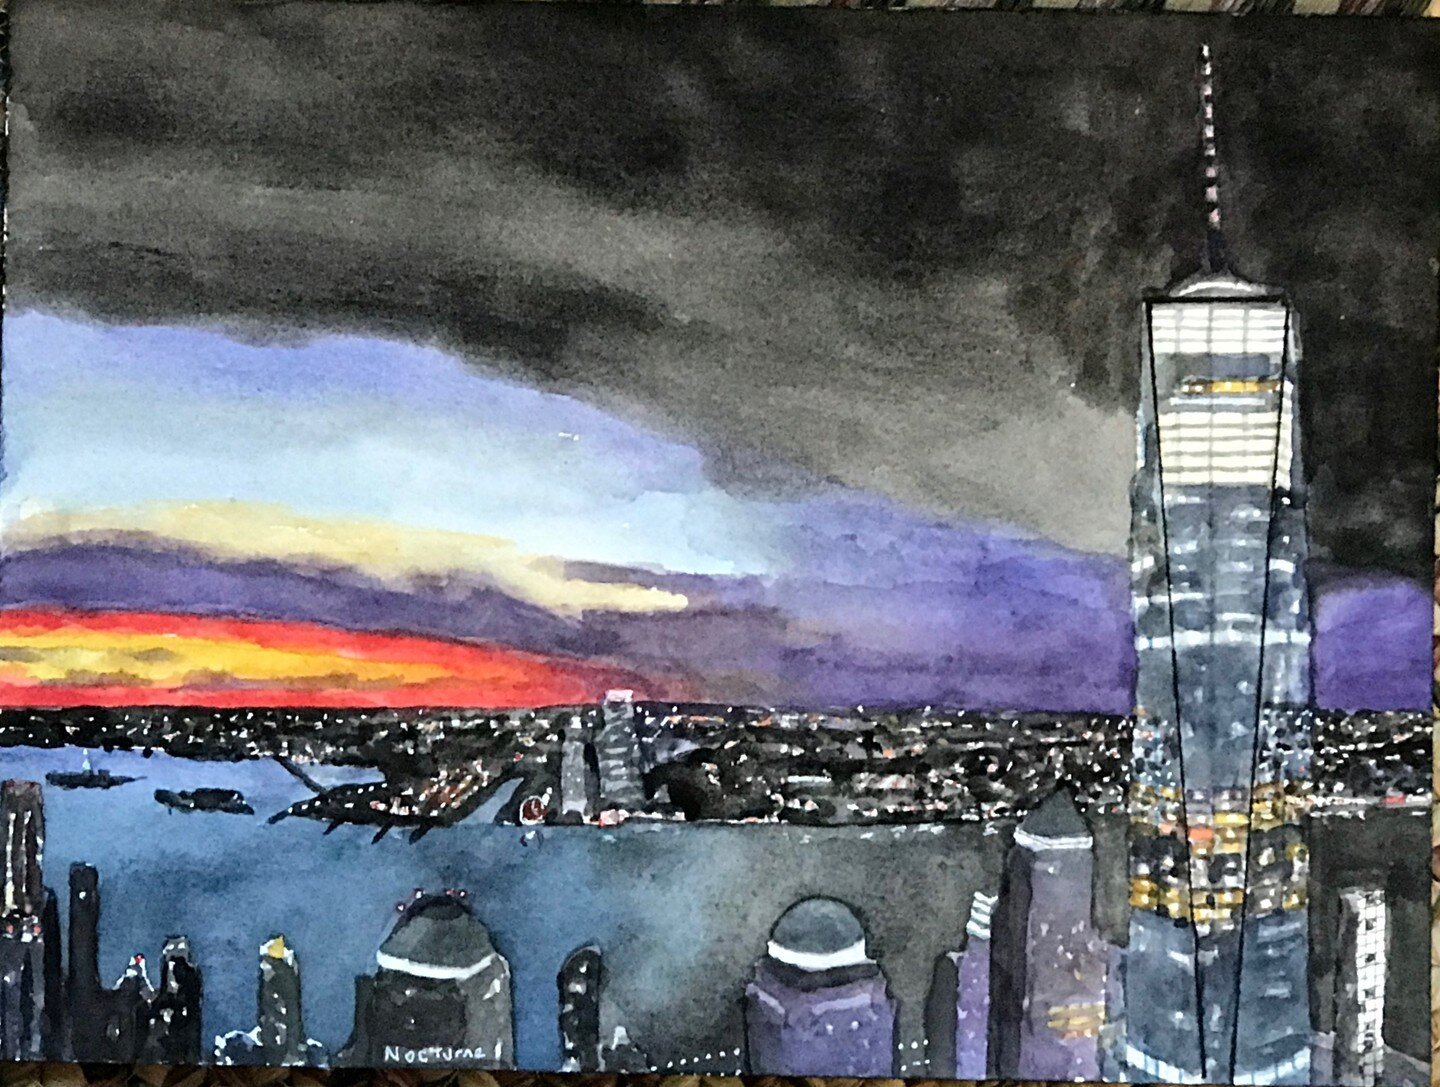 Happy to have my &quot;Nocturne&quot; watecolor included in this online benefit auction on Artsy for Turkish Earthquake relief.
NYC Culture Club and Turkish Philanthropy Funds are hosting a benefit reception on the terrace of 3 WTC. Artwork will be o